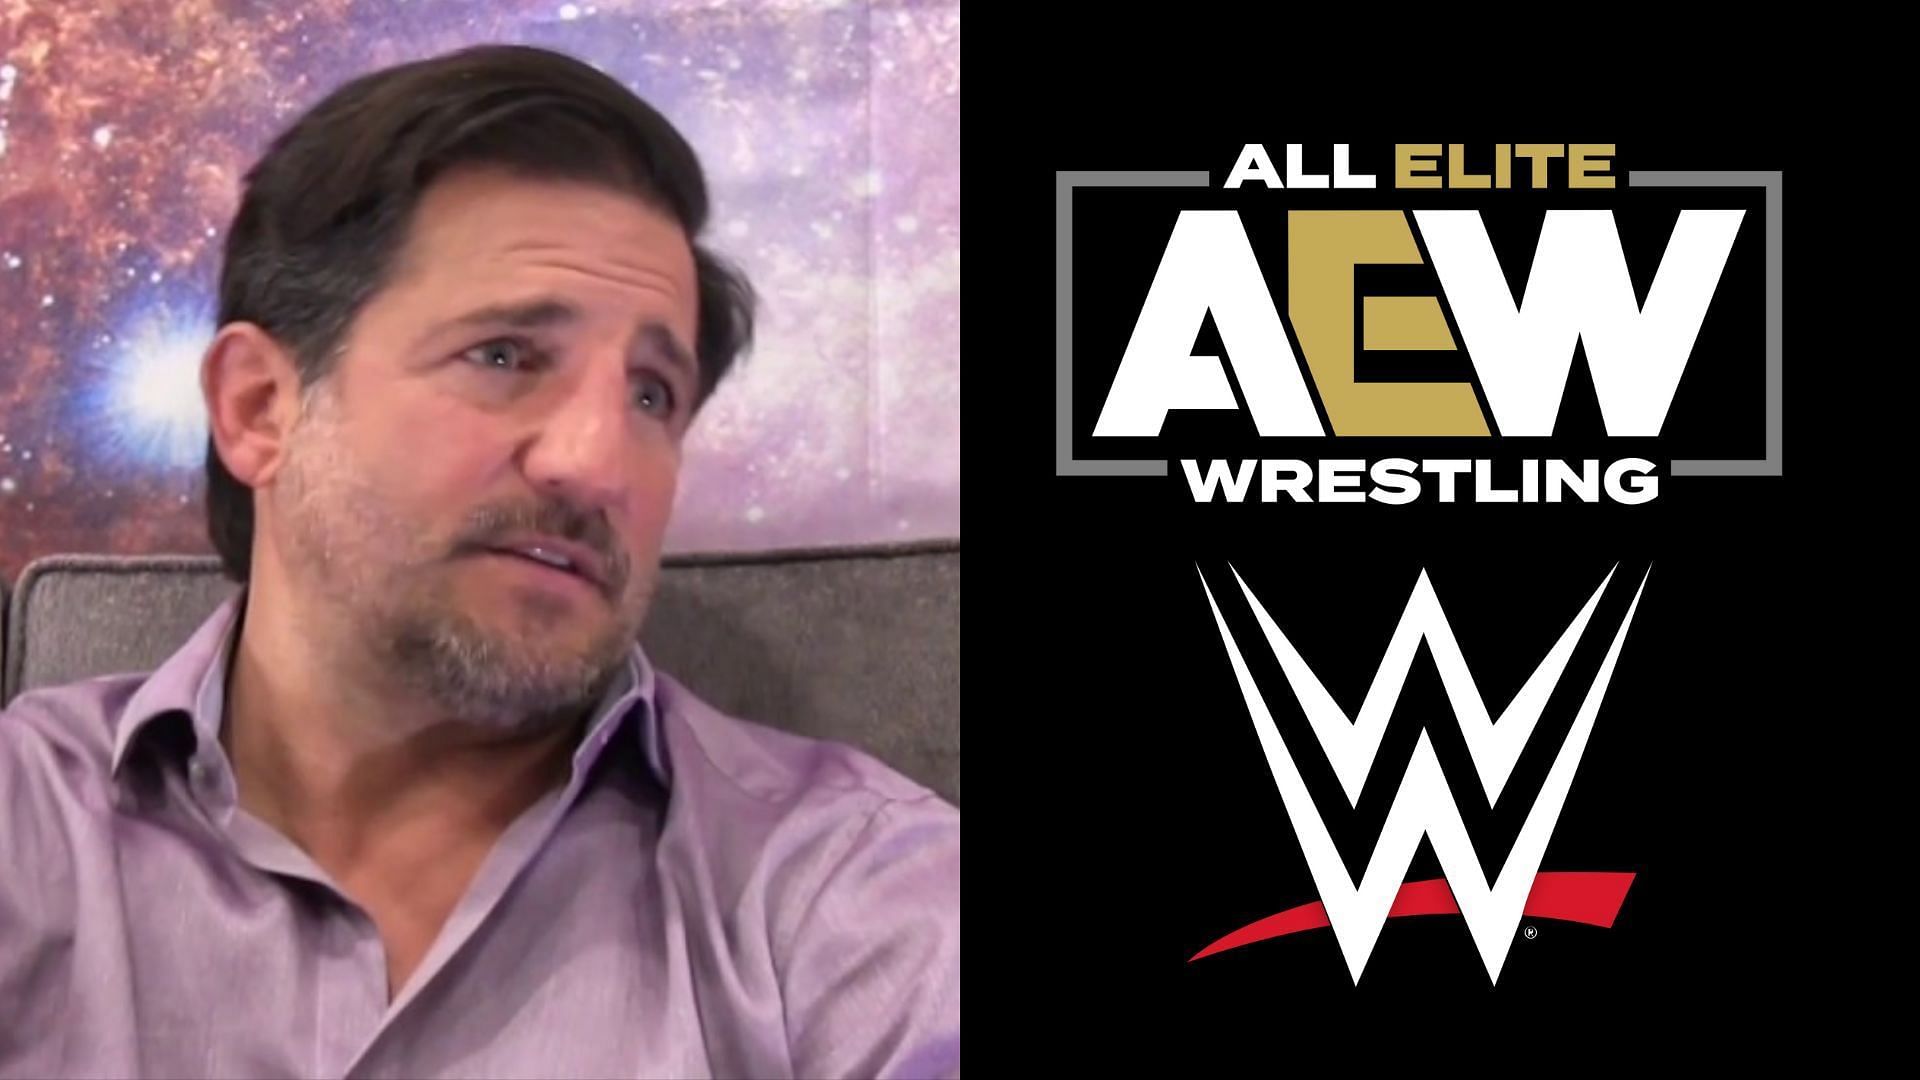 Disco Inferno recently praised a top AEW star.